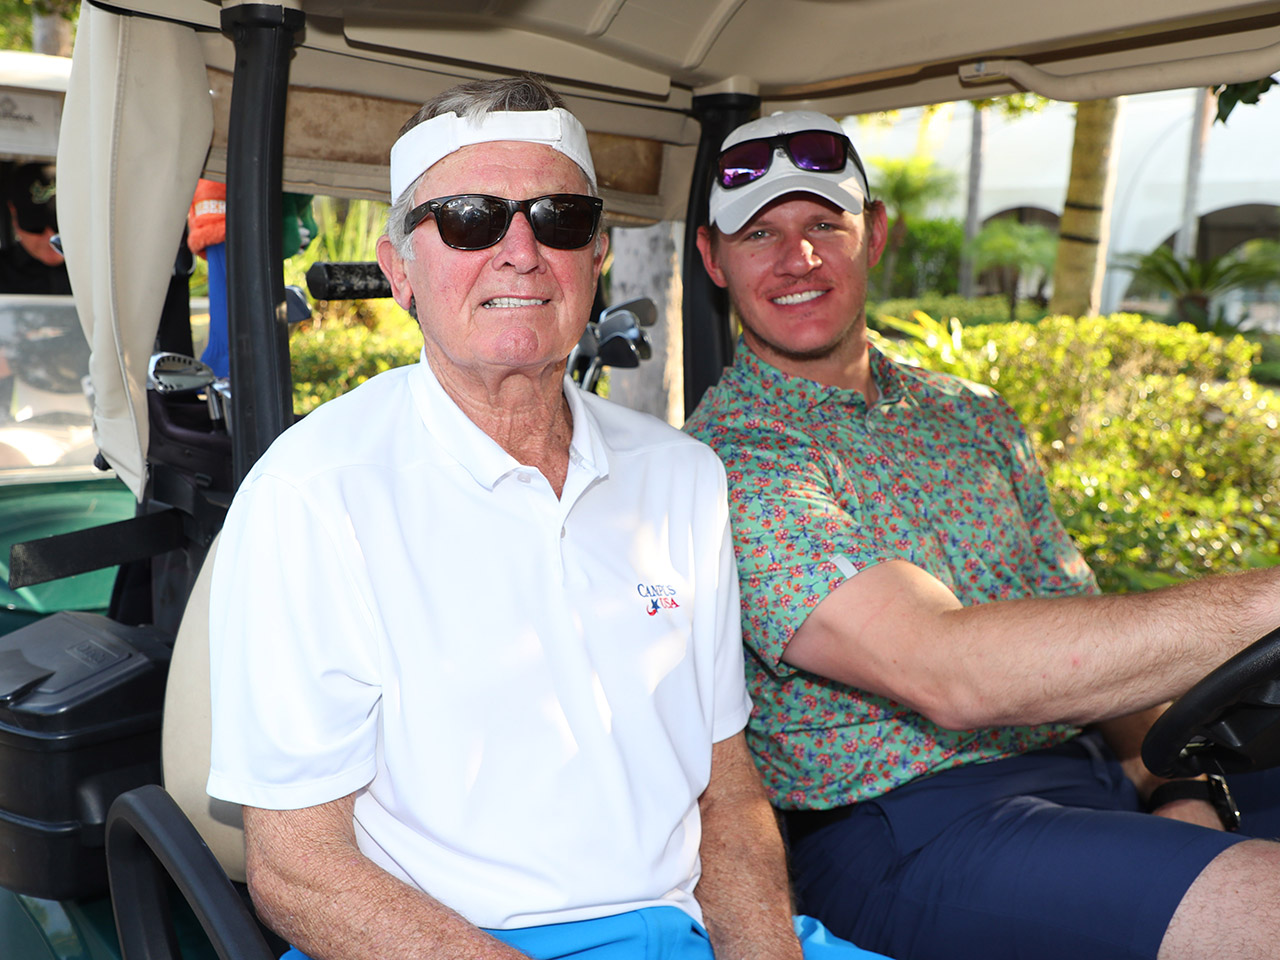 Coach Steve Spurrier & A.J. Edds of the Big Ten Conference ready to tee it up